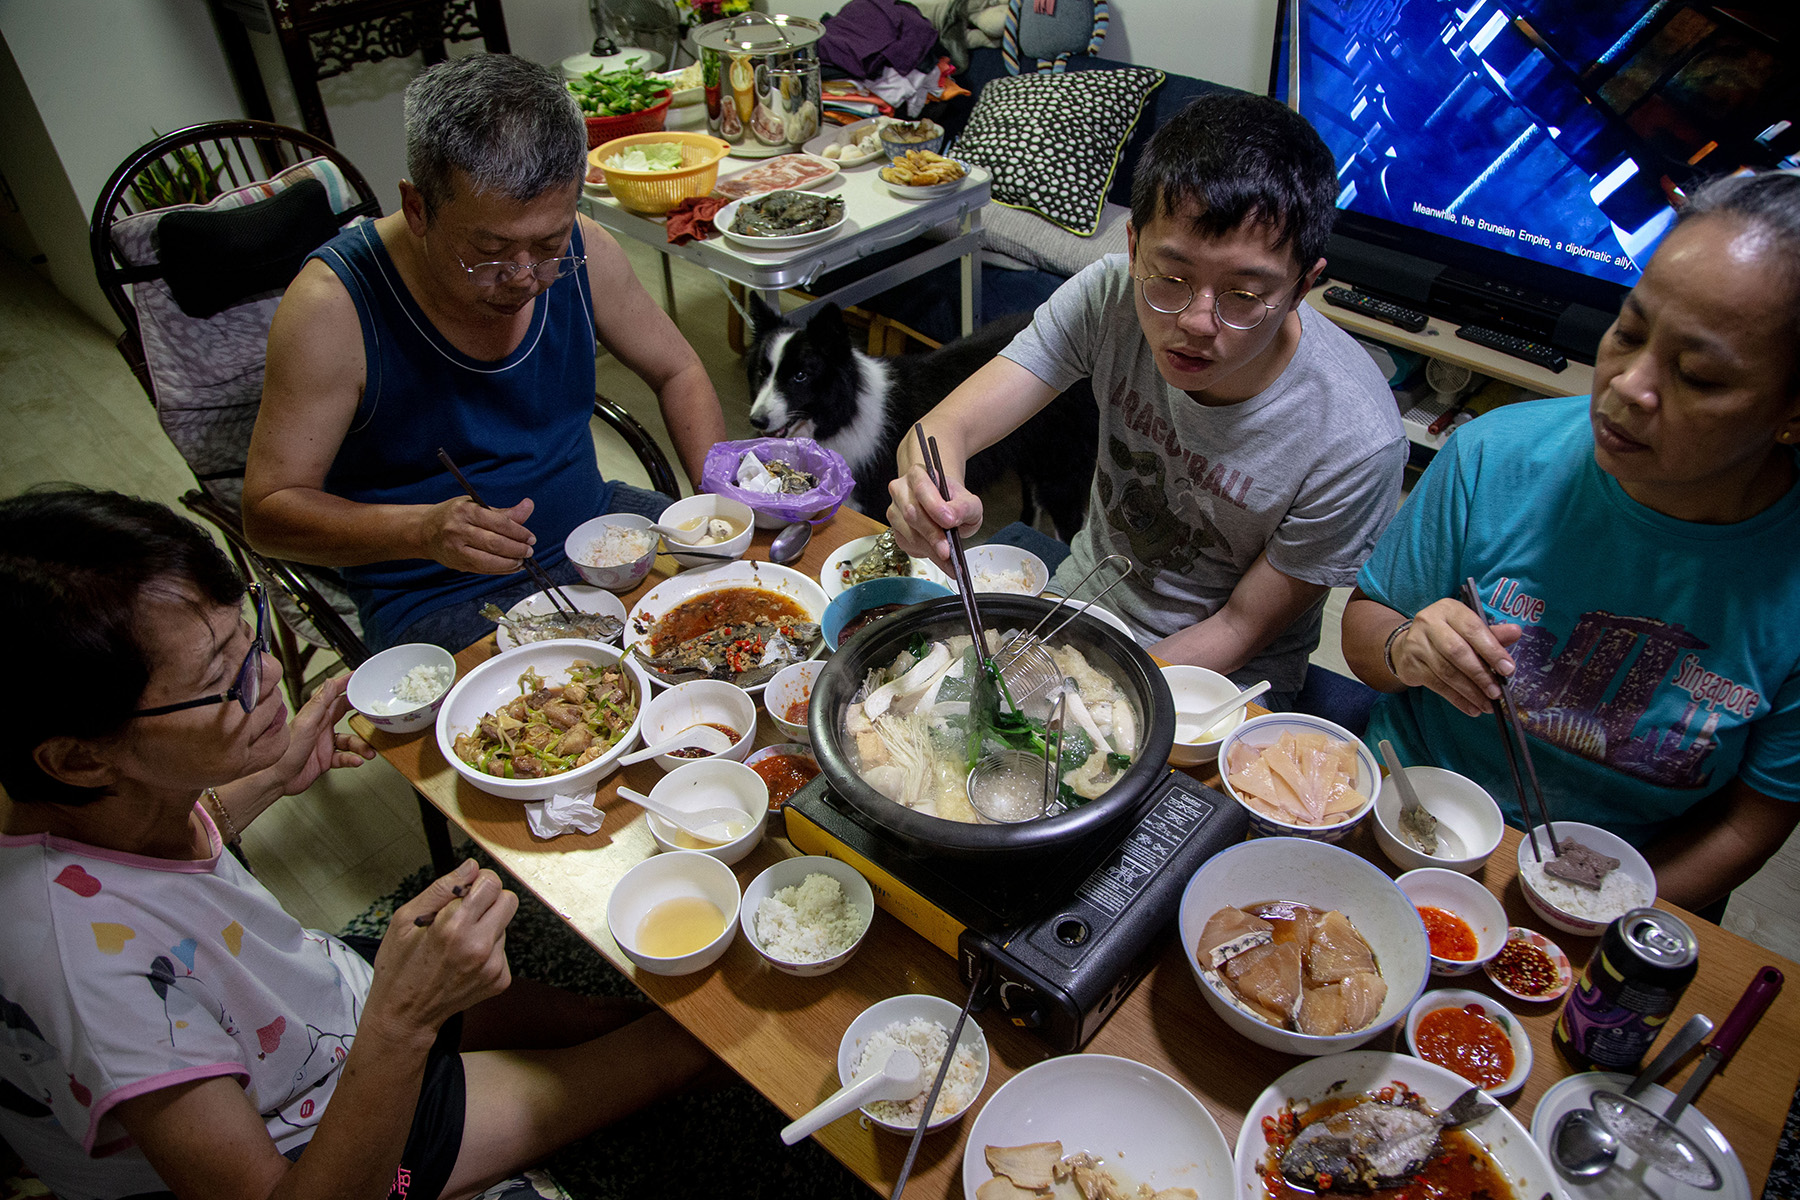 A family (three generations) having a steamboat dinner to celebrate Lunar New Year in Singapore, lots of small dishes on the table

